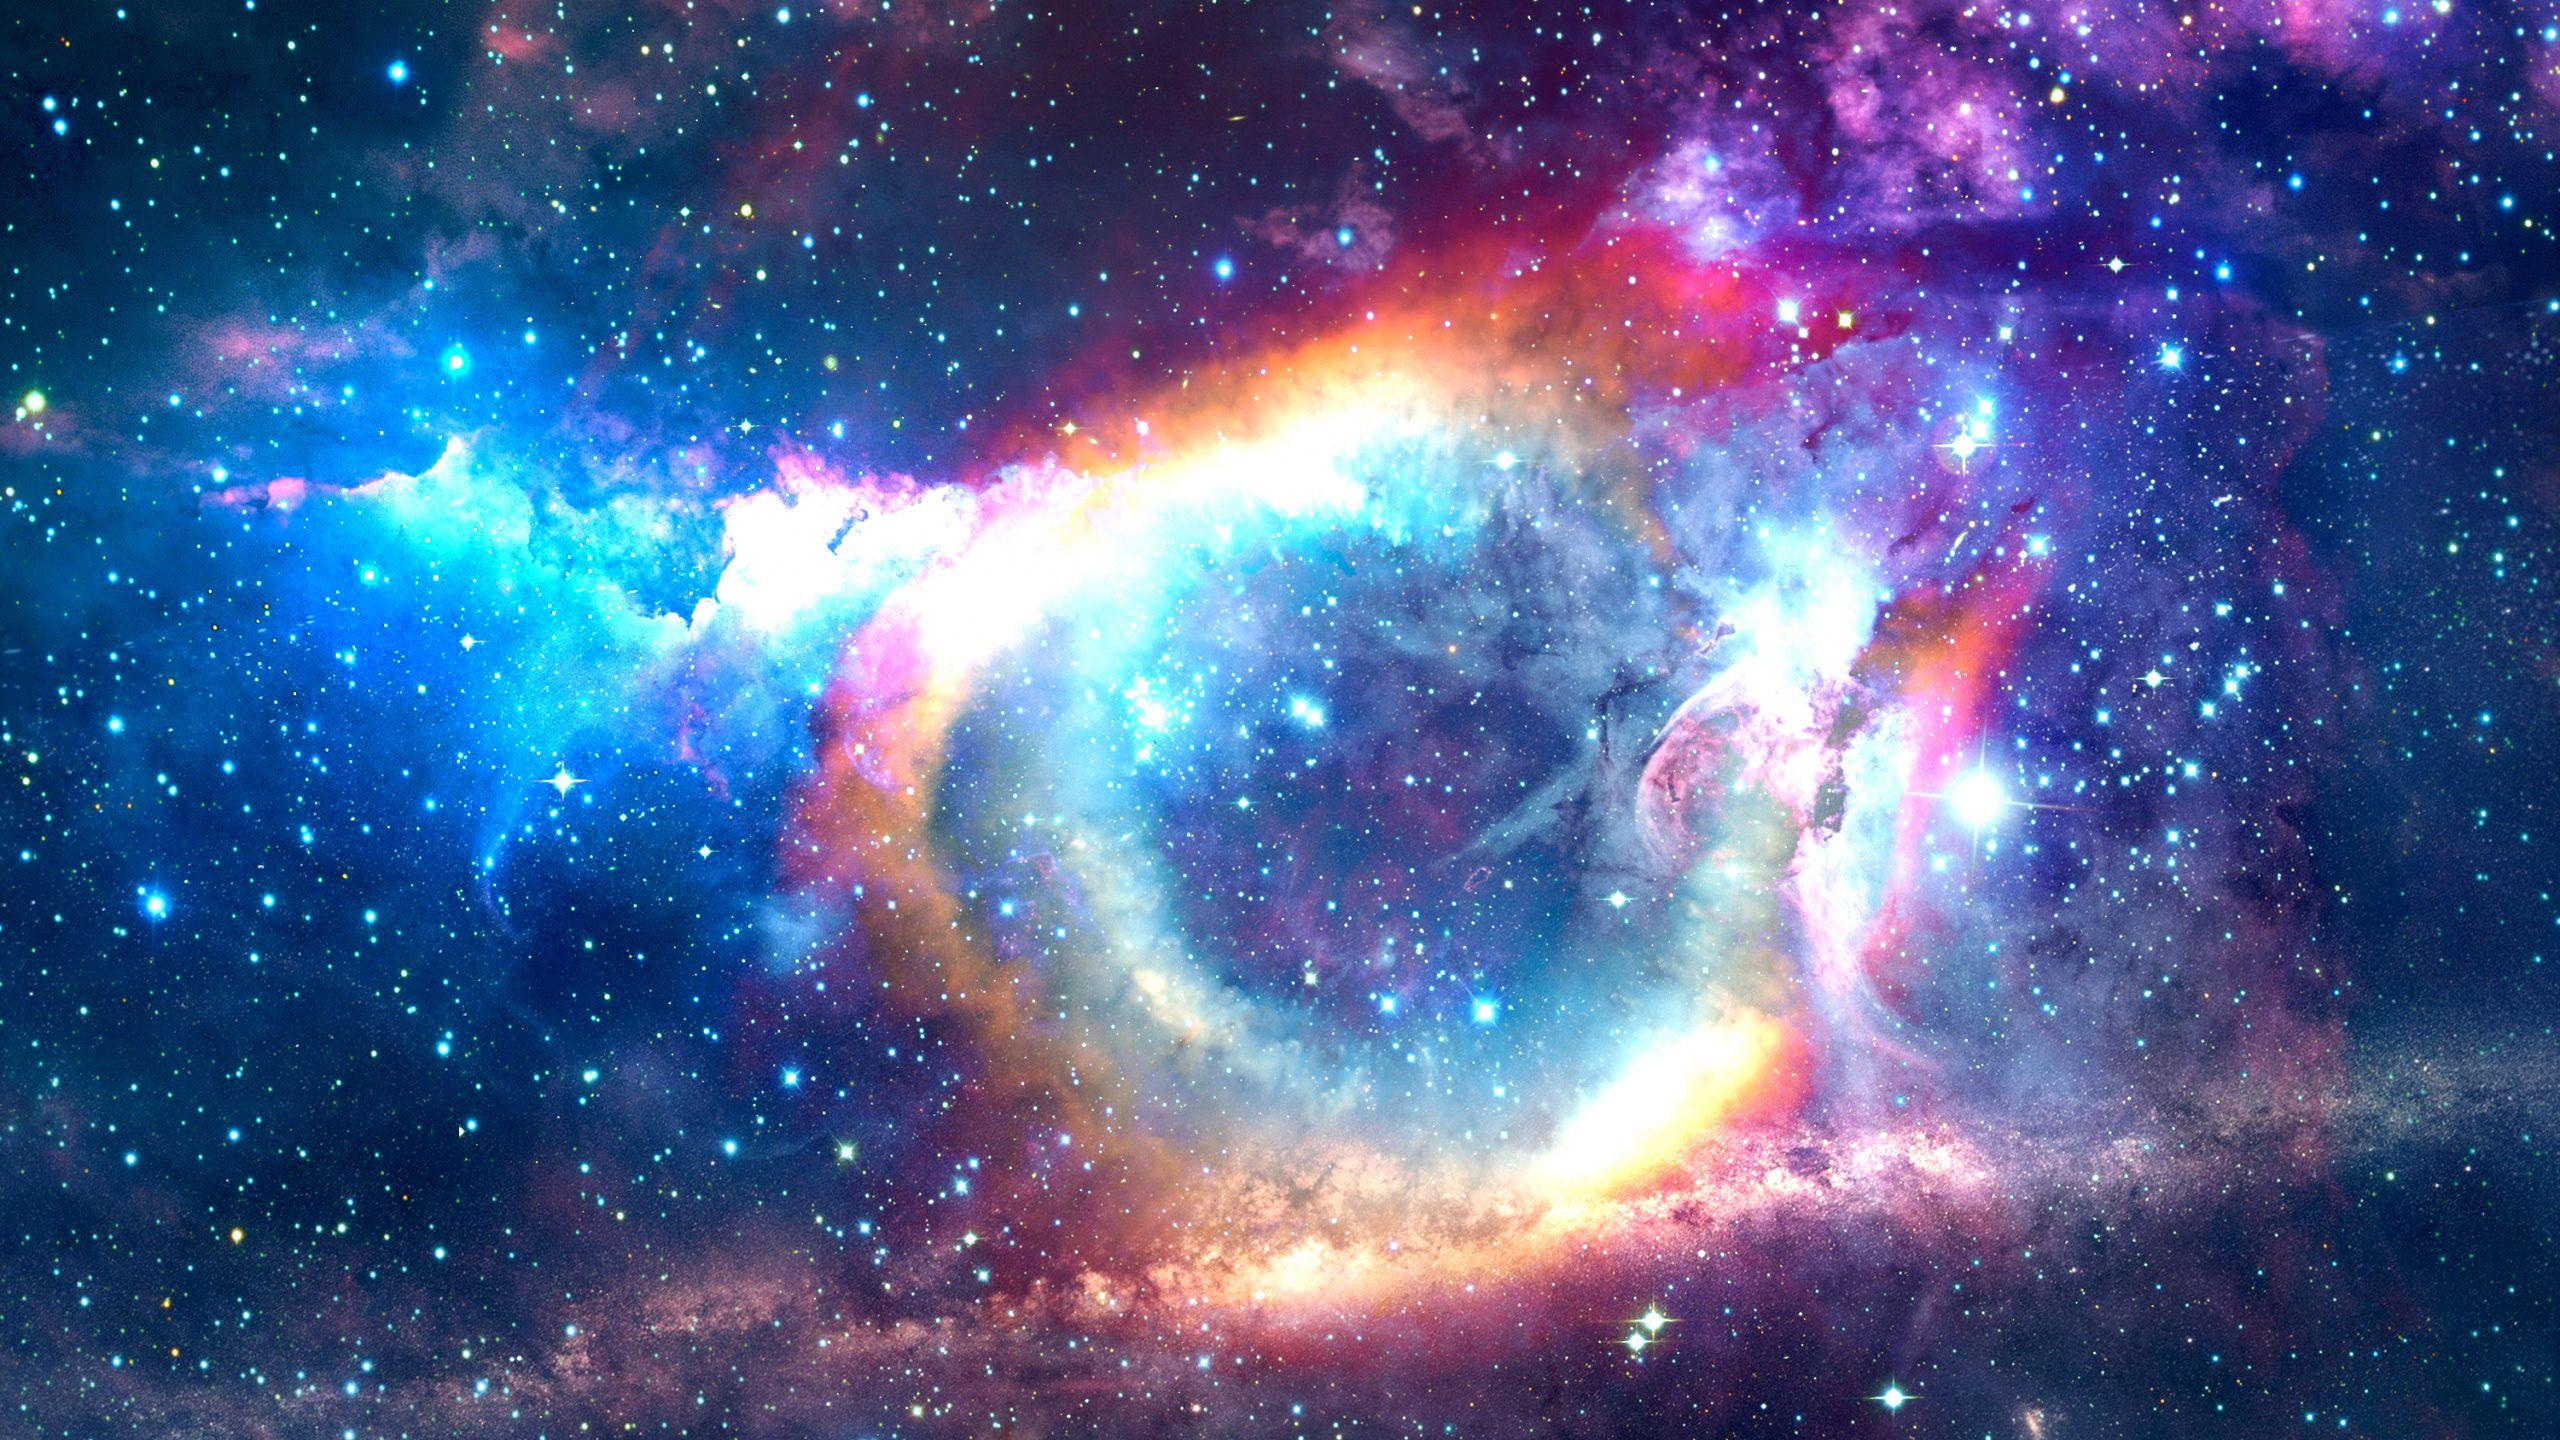 Download wallpaper 2560x1440 space, sky, stars widescreen 16:9 hd background